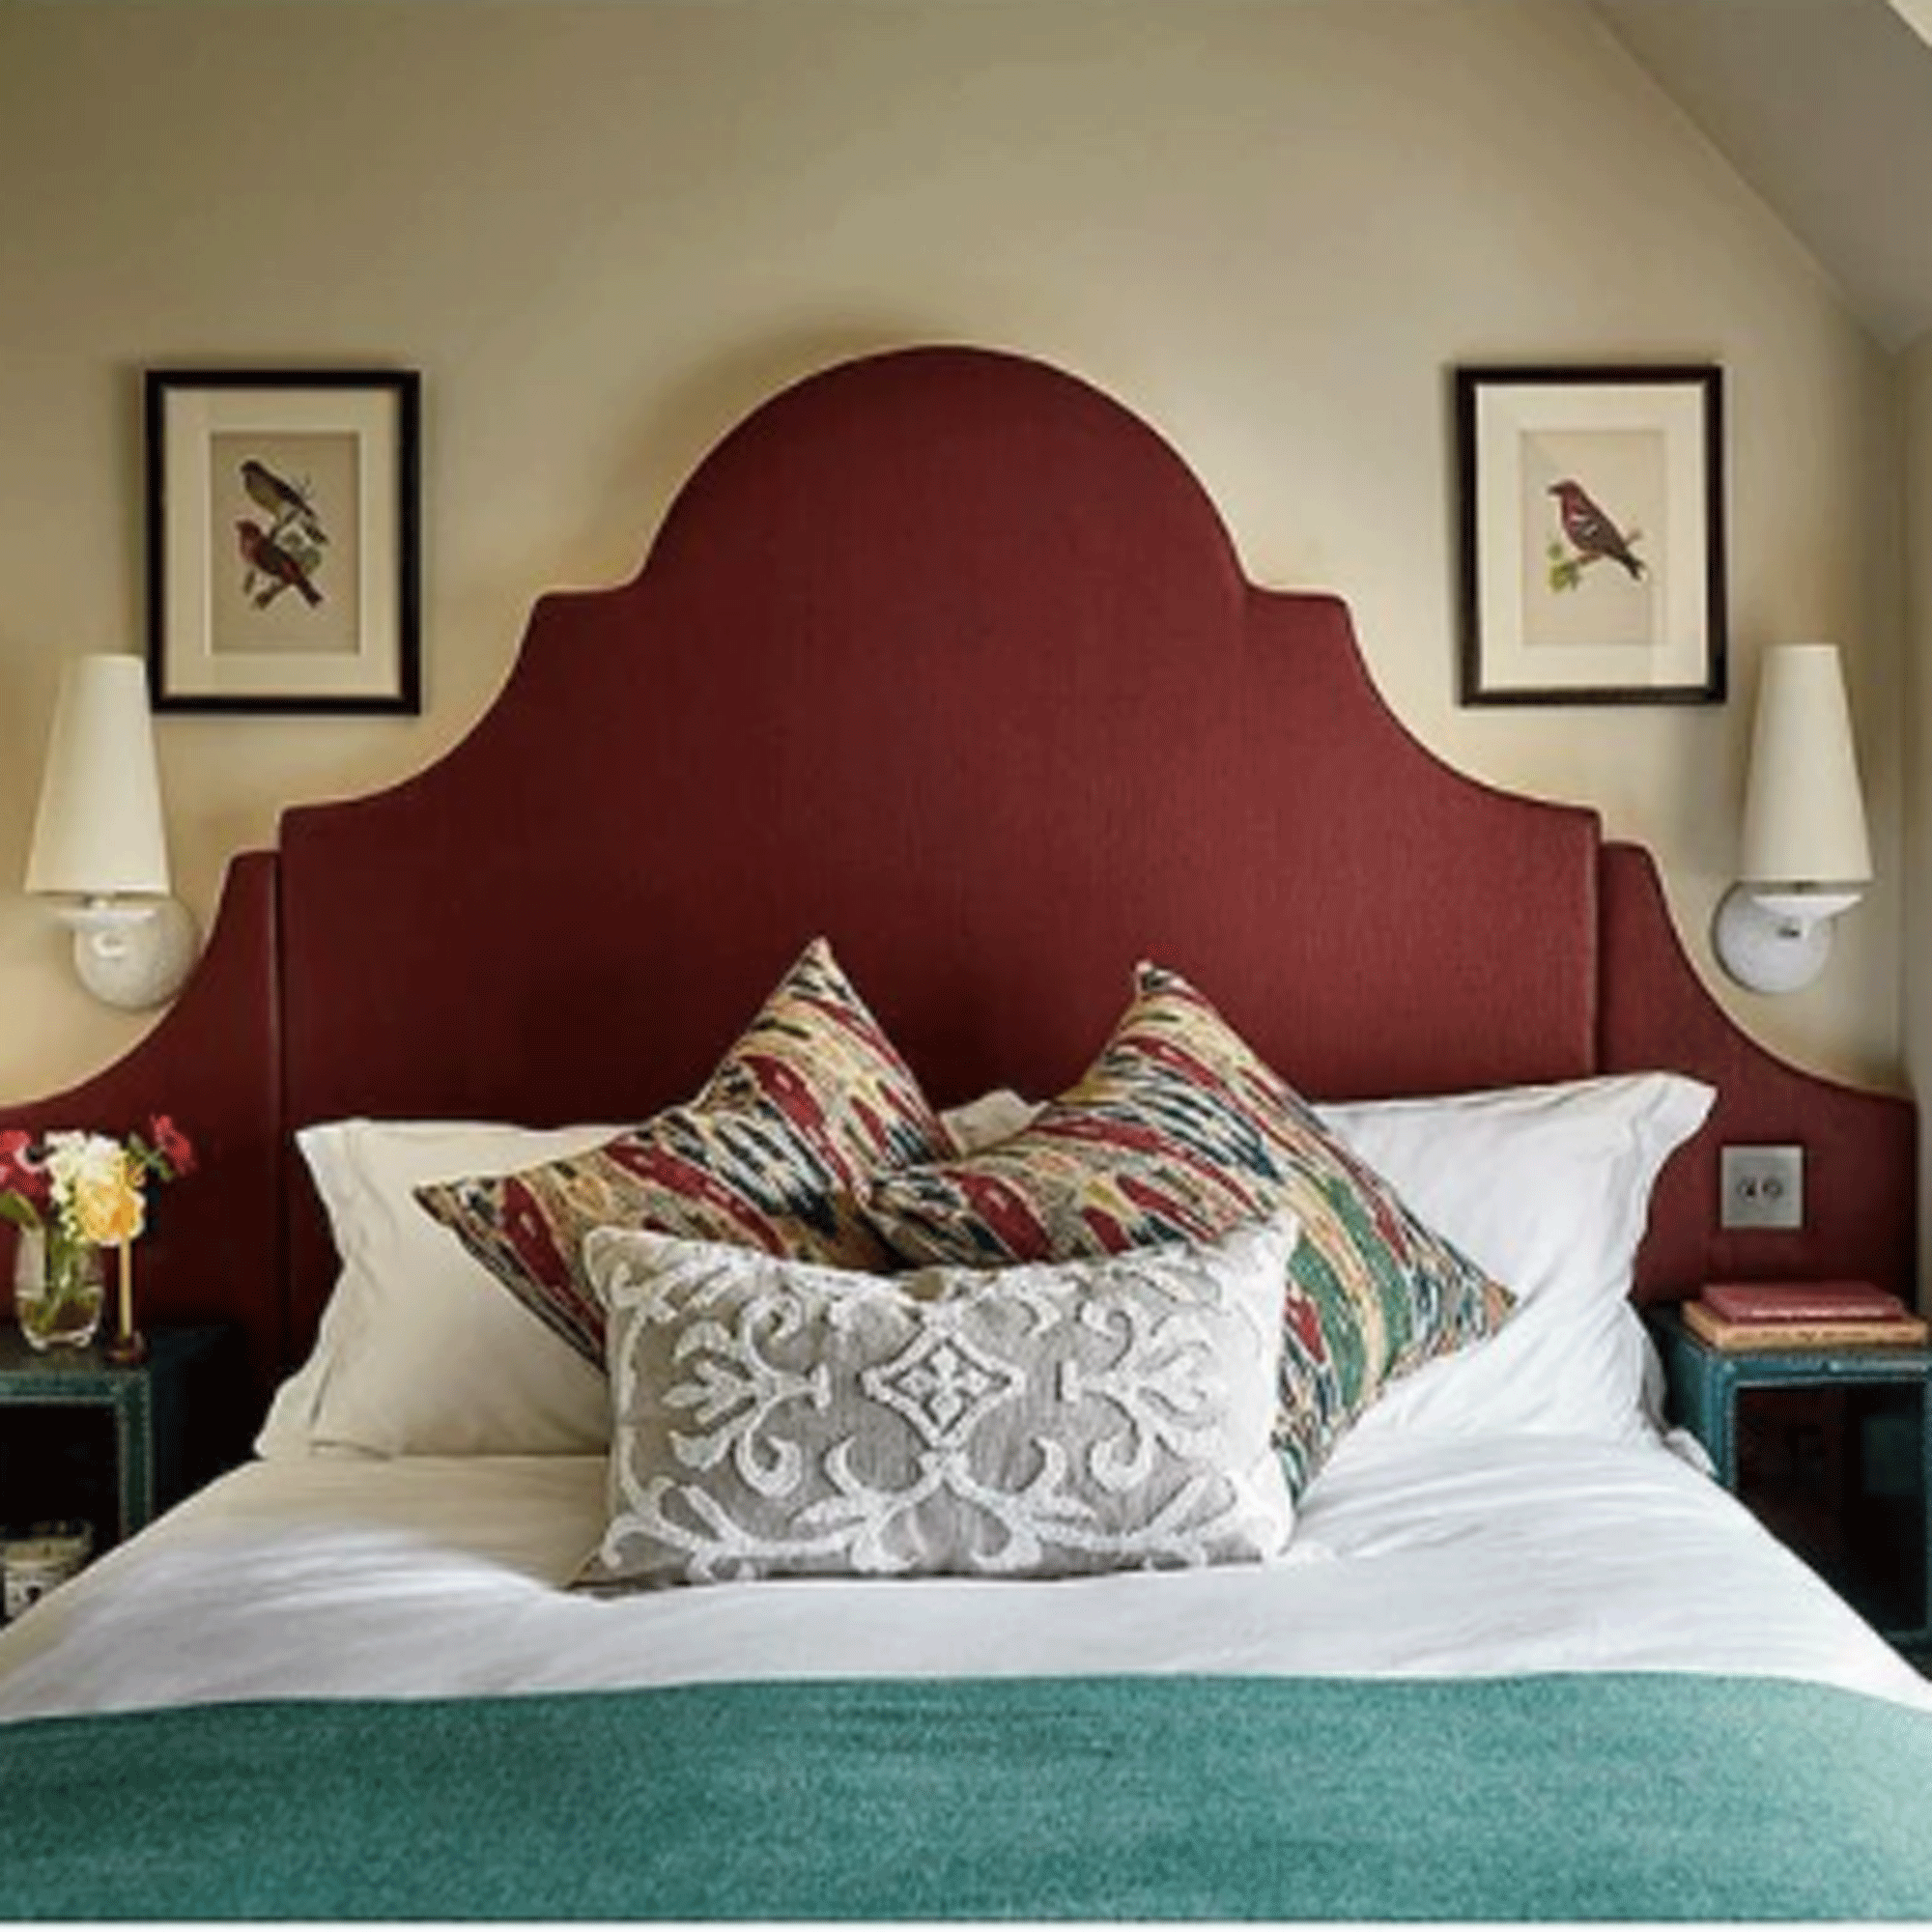 Bedroom with red headboard and teal bed throw